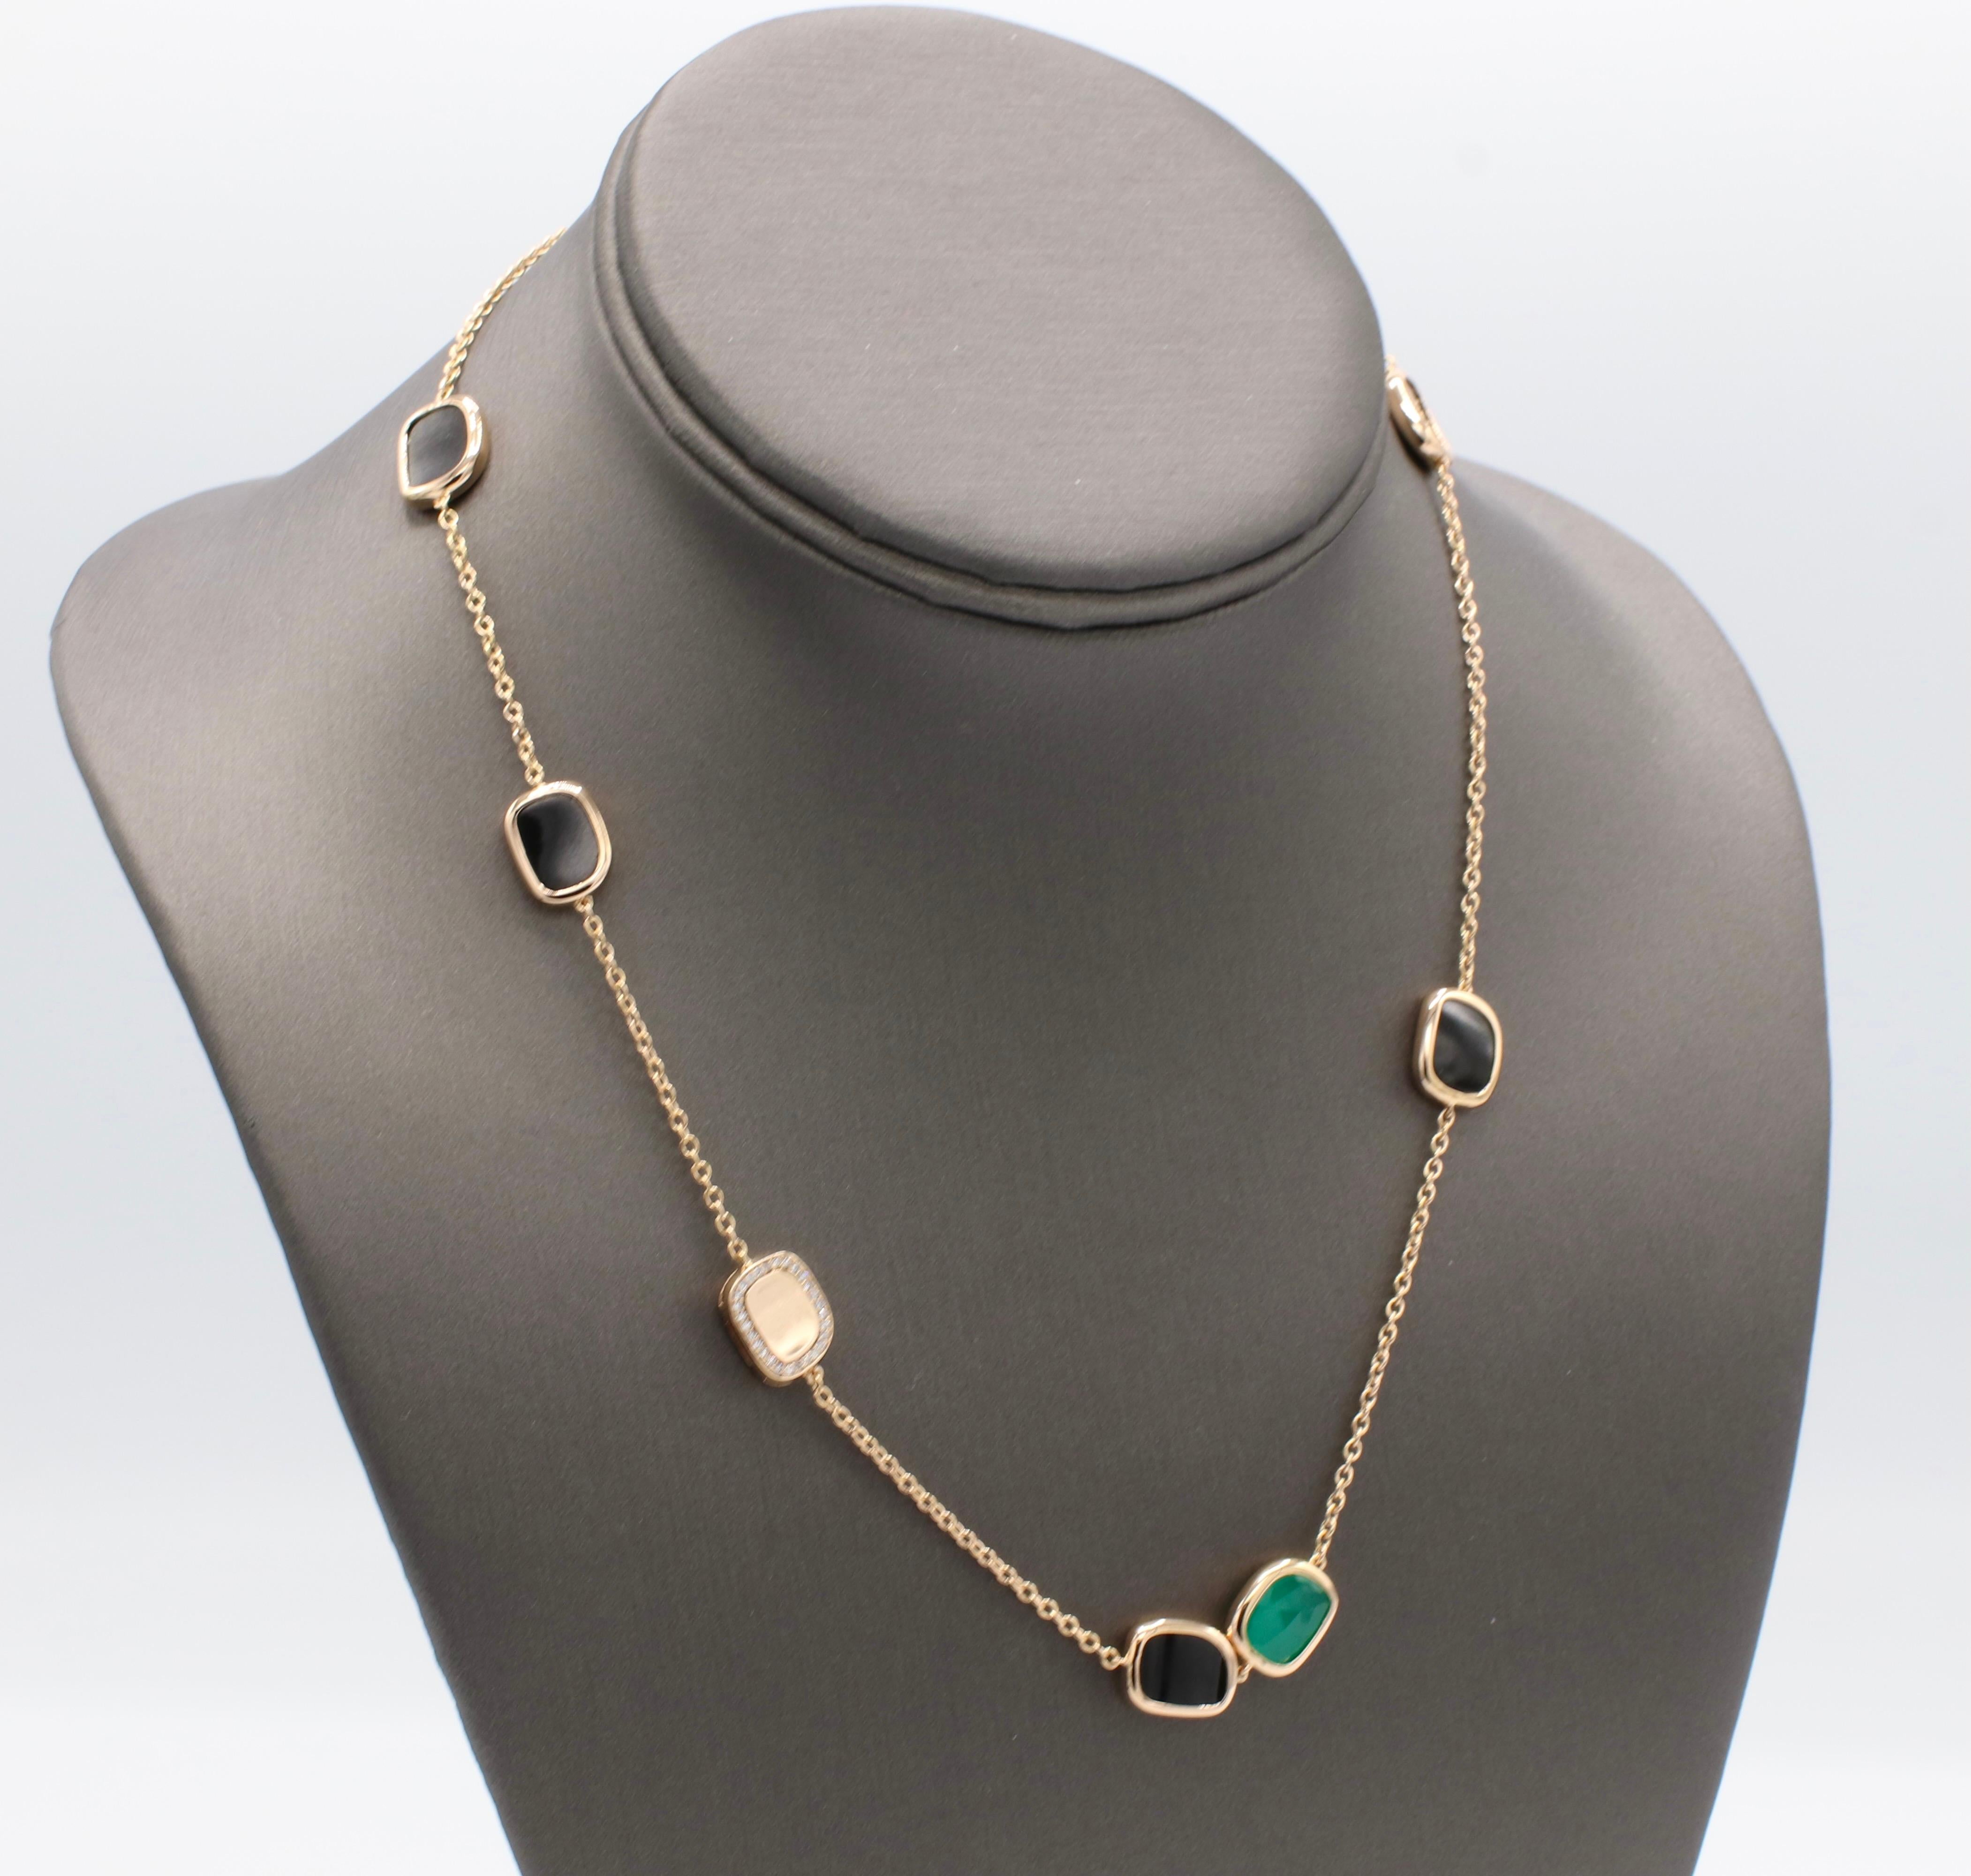 Roberto Coin 18 Karat Rose Gold Black Jade, Green Agate & Diamond Station Necklace 
Metal: 18k rose gold 
Weight: 13.7 grams
Length: 18 inches, can be adjusted to wear at 17 inches 
Diamonds: Approx. .15 CTW G VS
Stations measures 10 x 12mm
